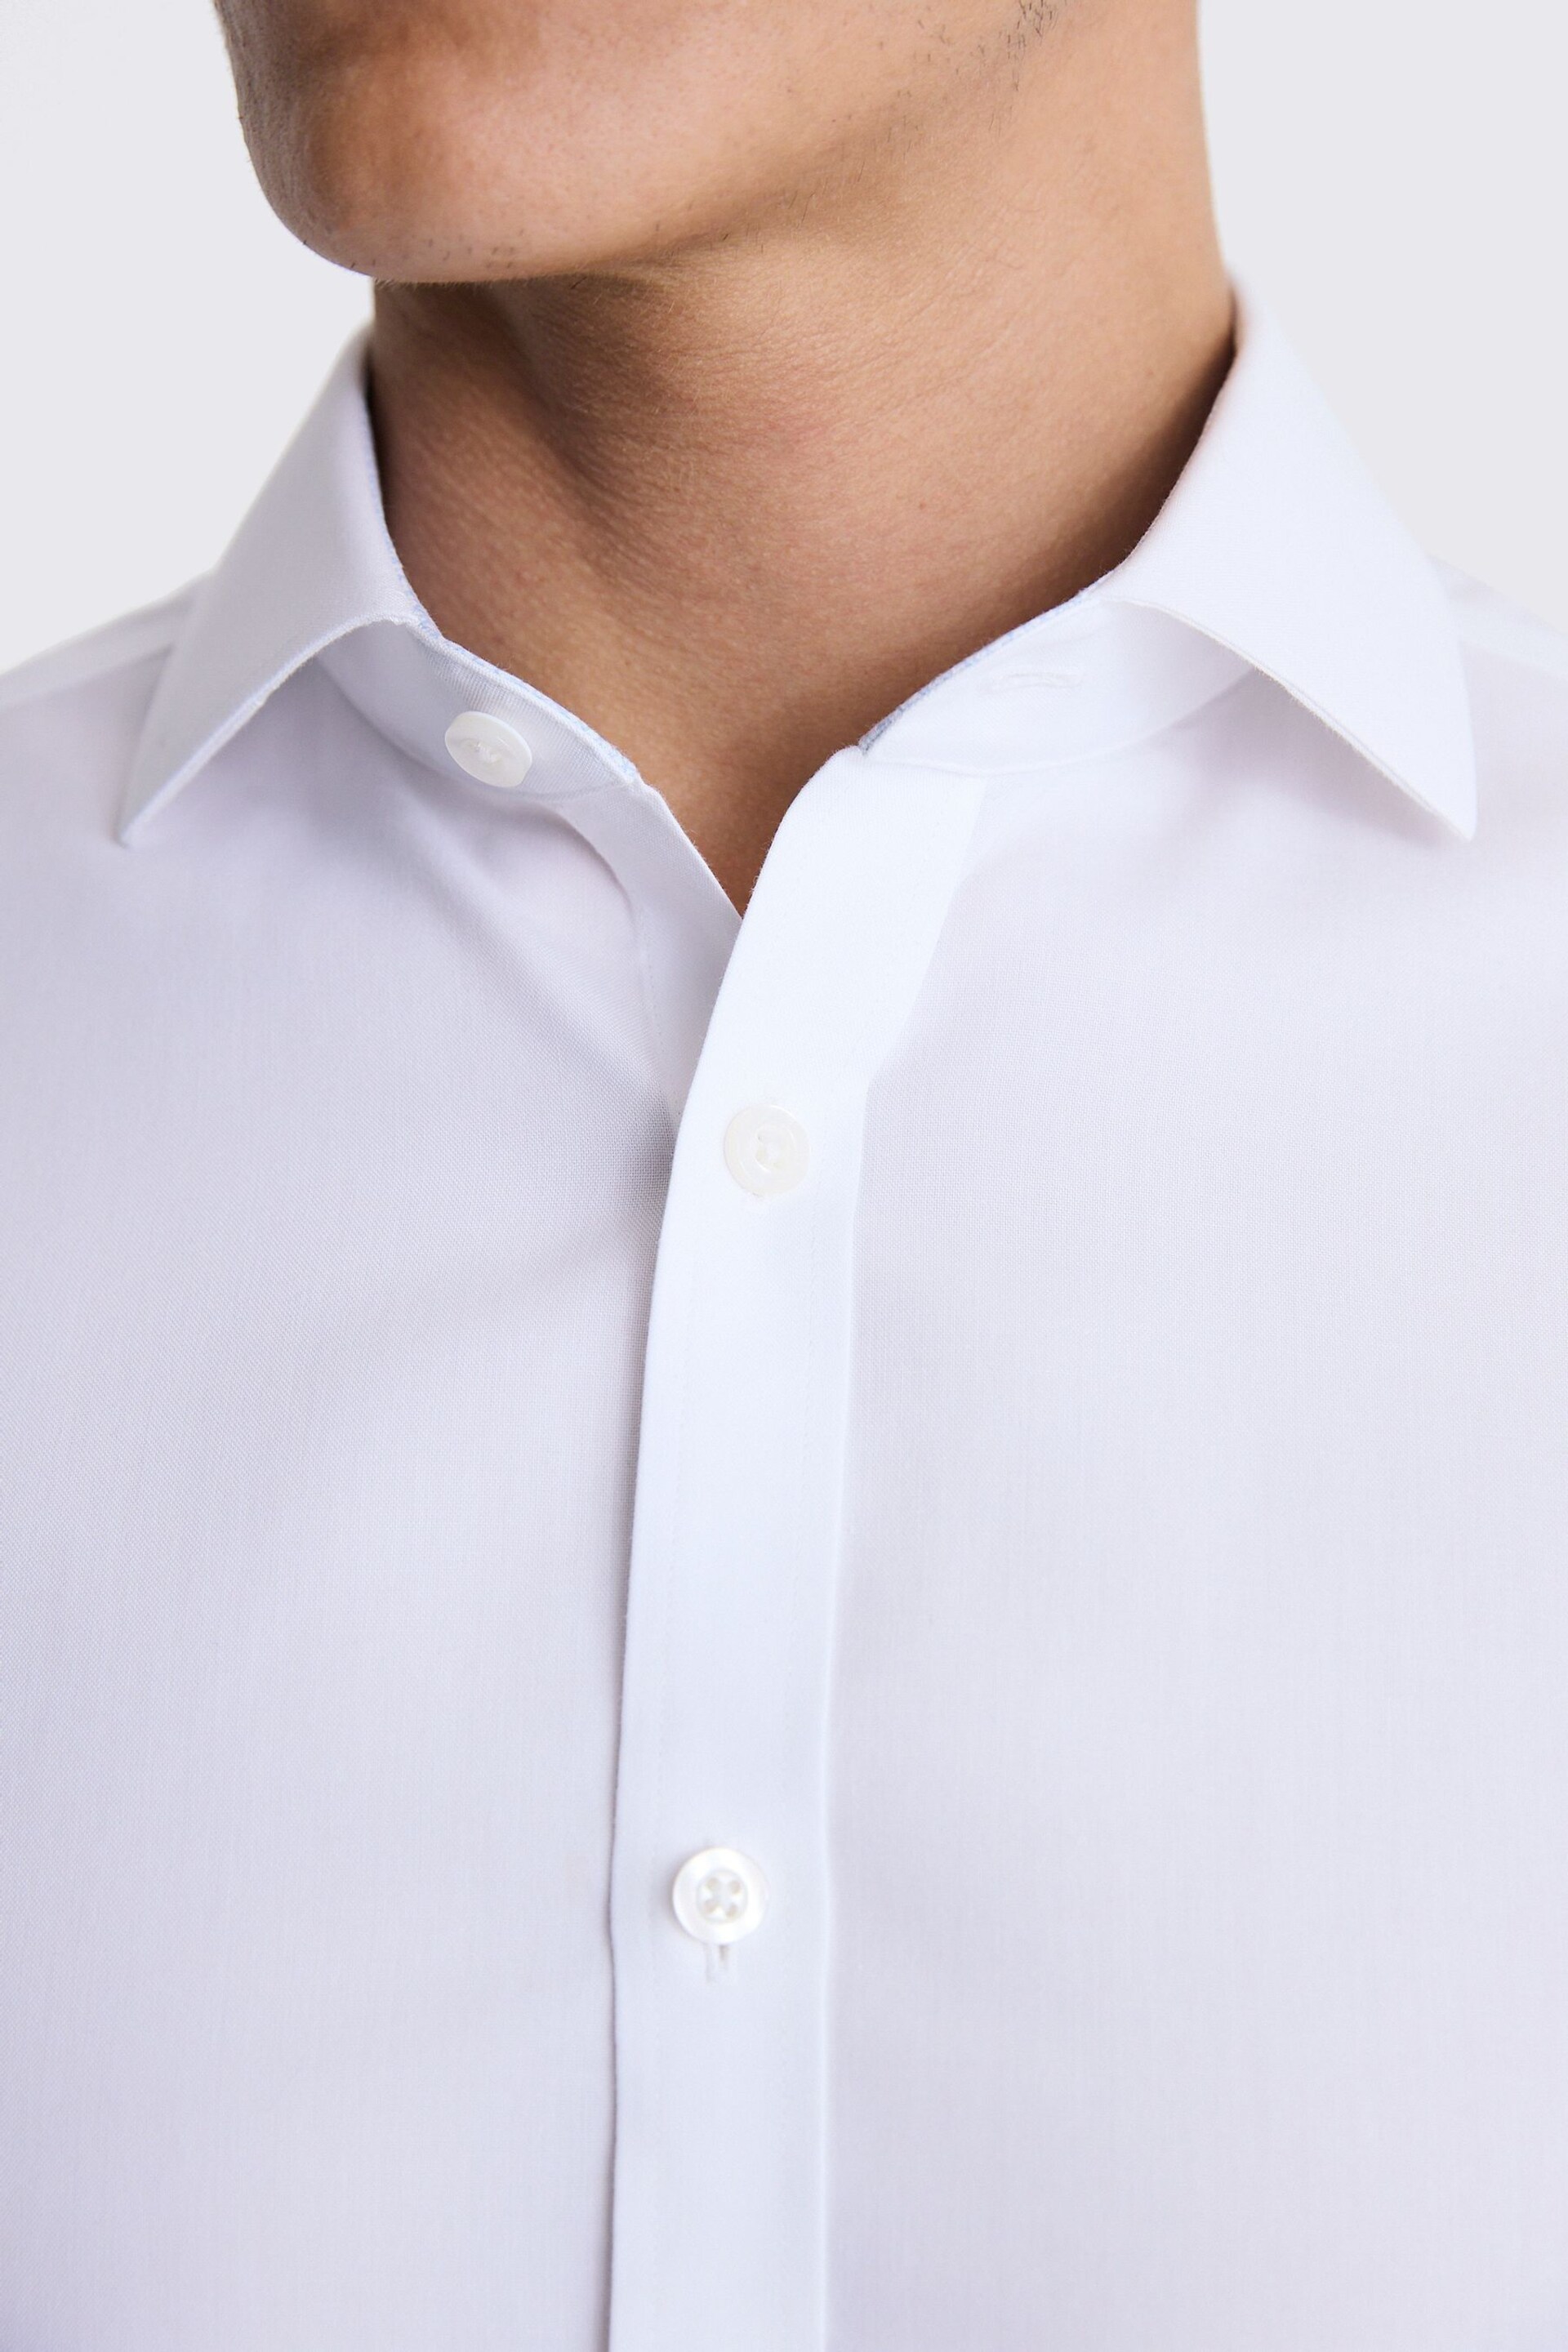 MOSS White Tailored Fit Pinpoint Oxford Contrast Non Iron Shirt - Image 3 of 3